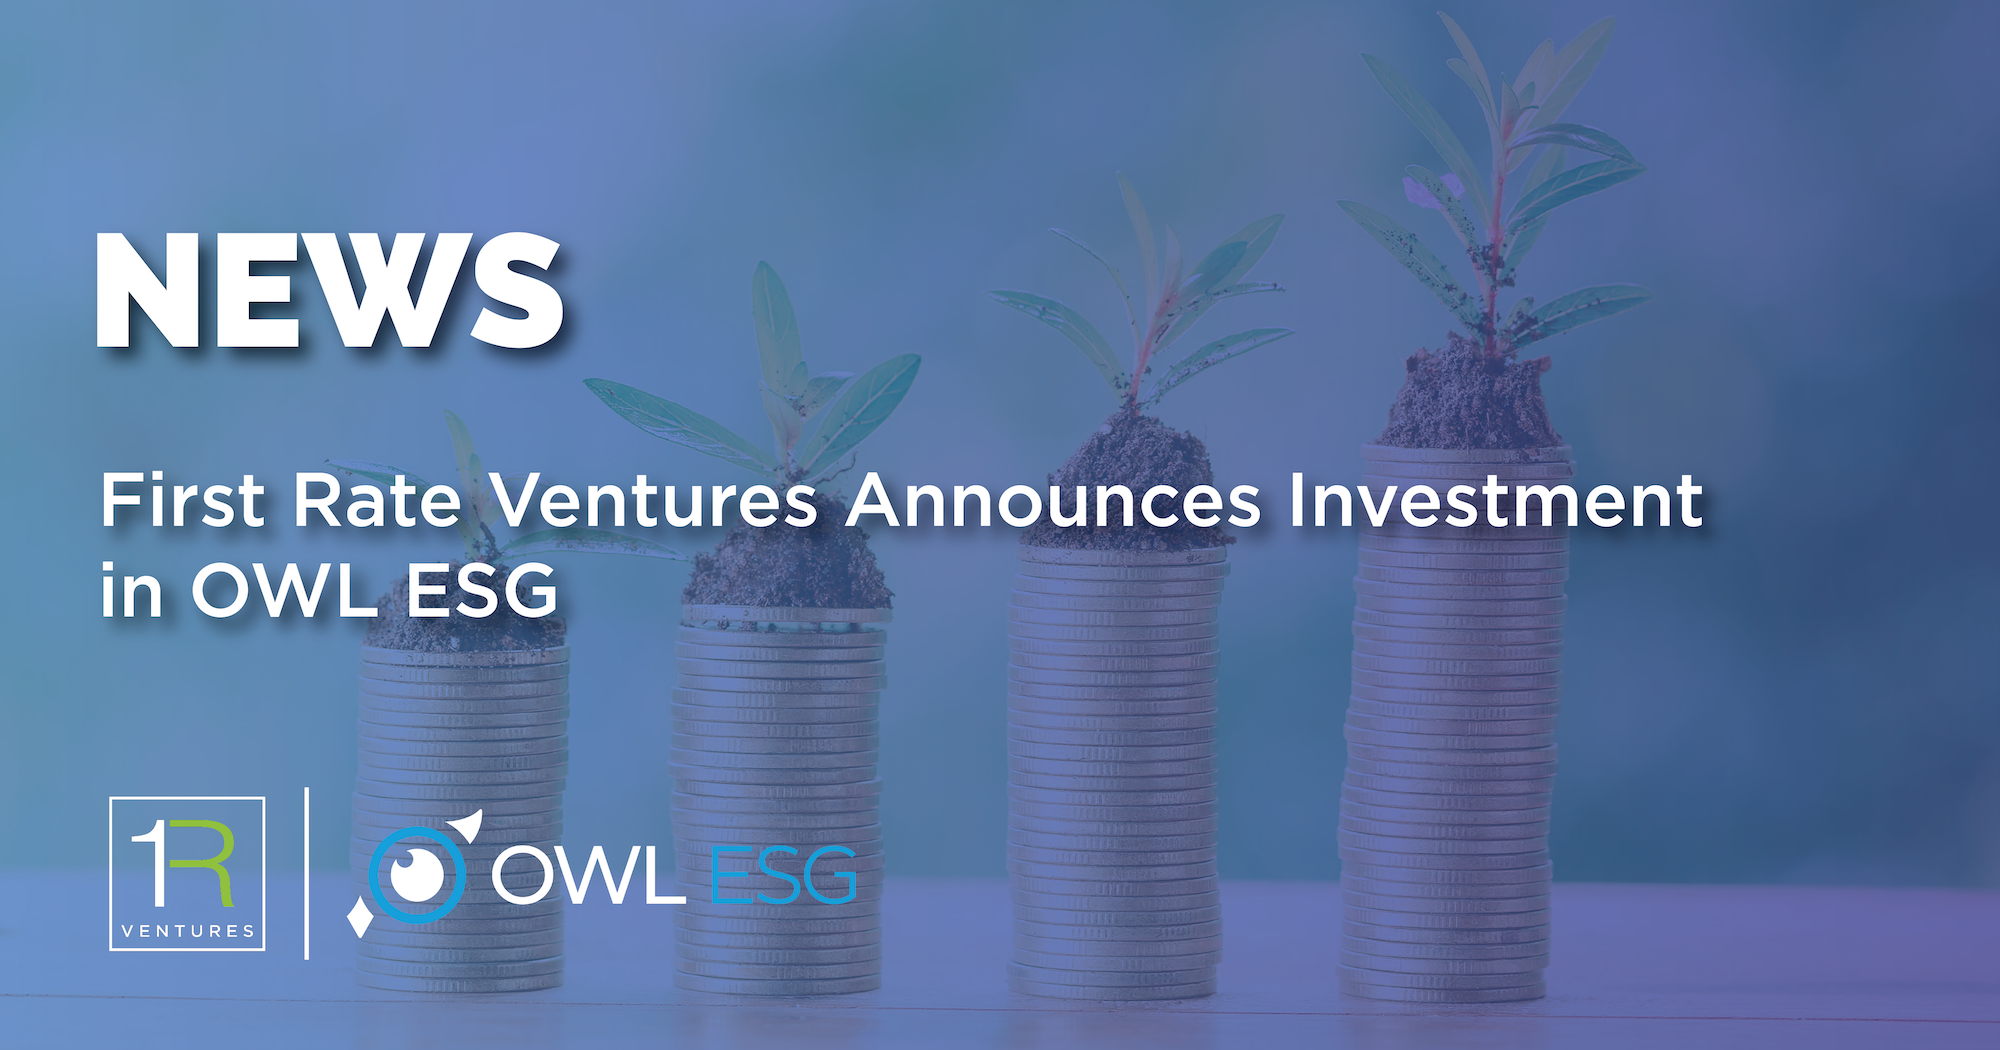 First Rate Ventures Announces Investment in OWL ESG from Recently Launched Venture Capital Fund